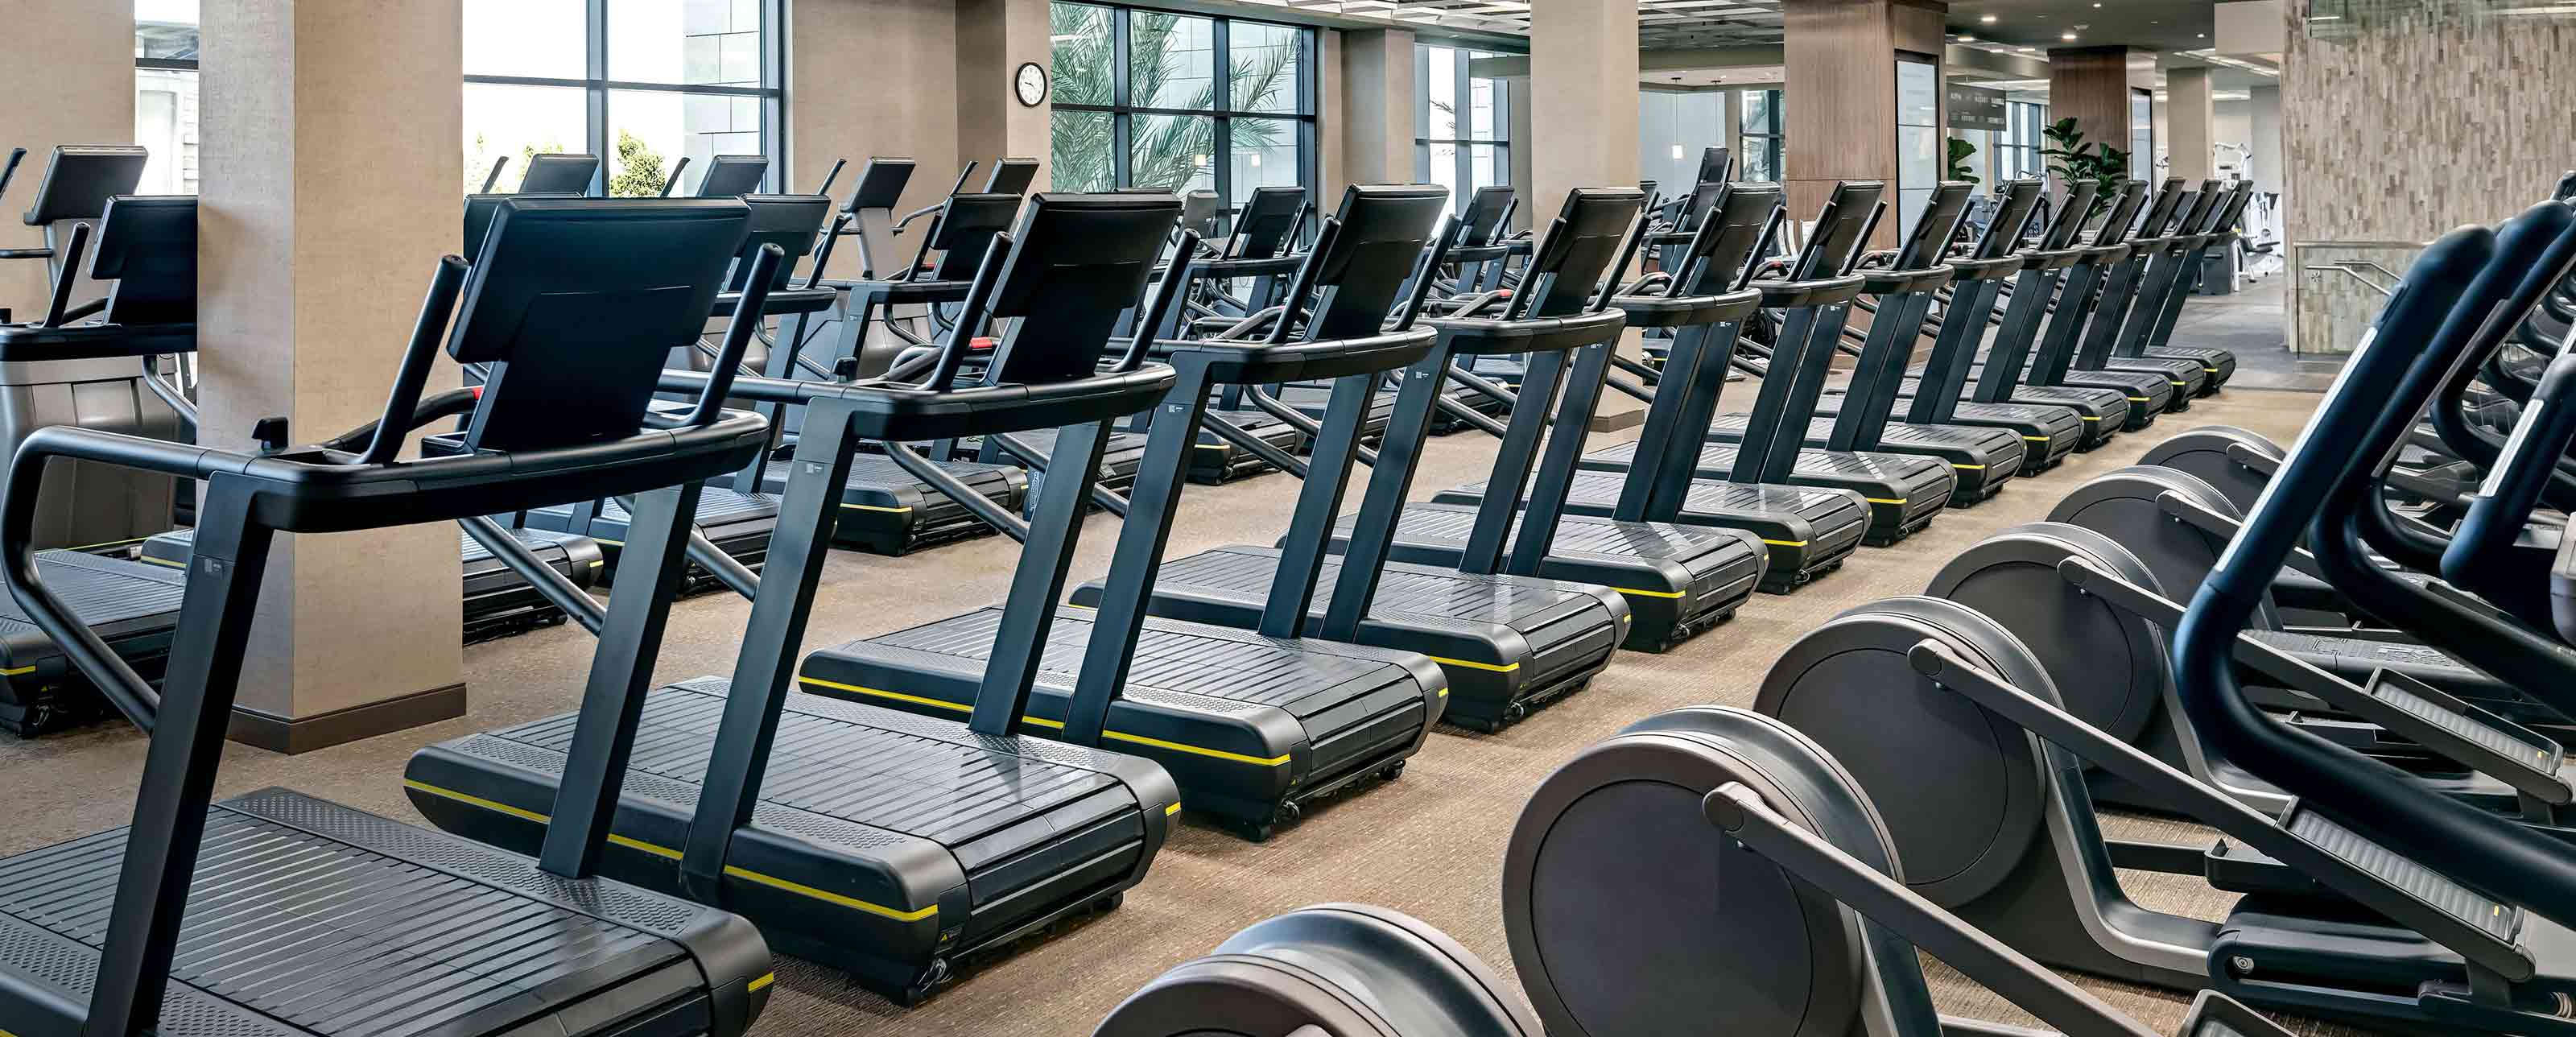 Rows of treadmills and cardio machines in a fitness area